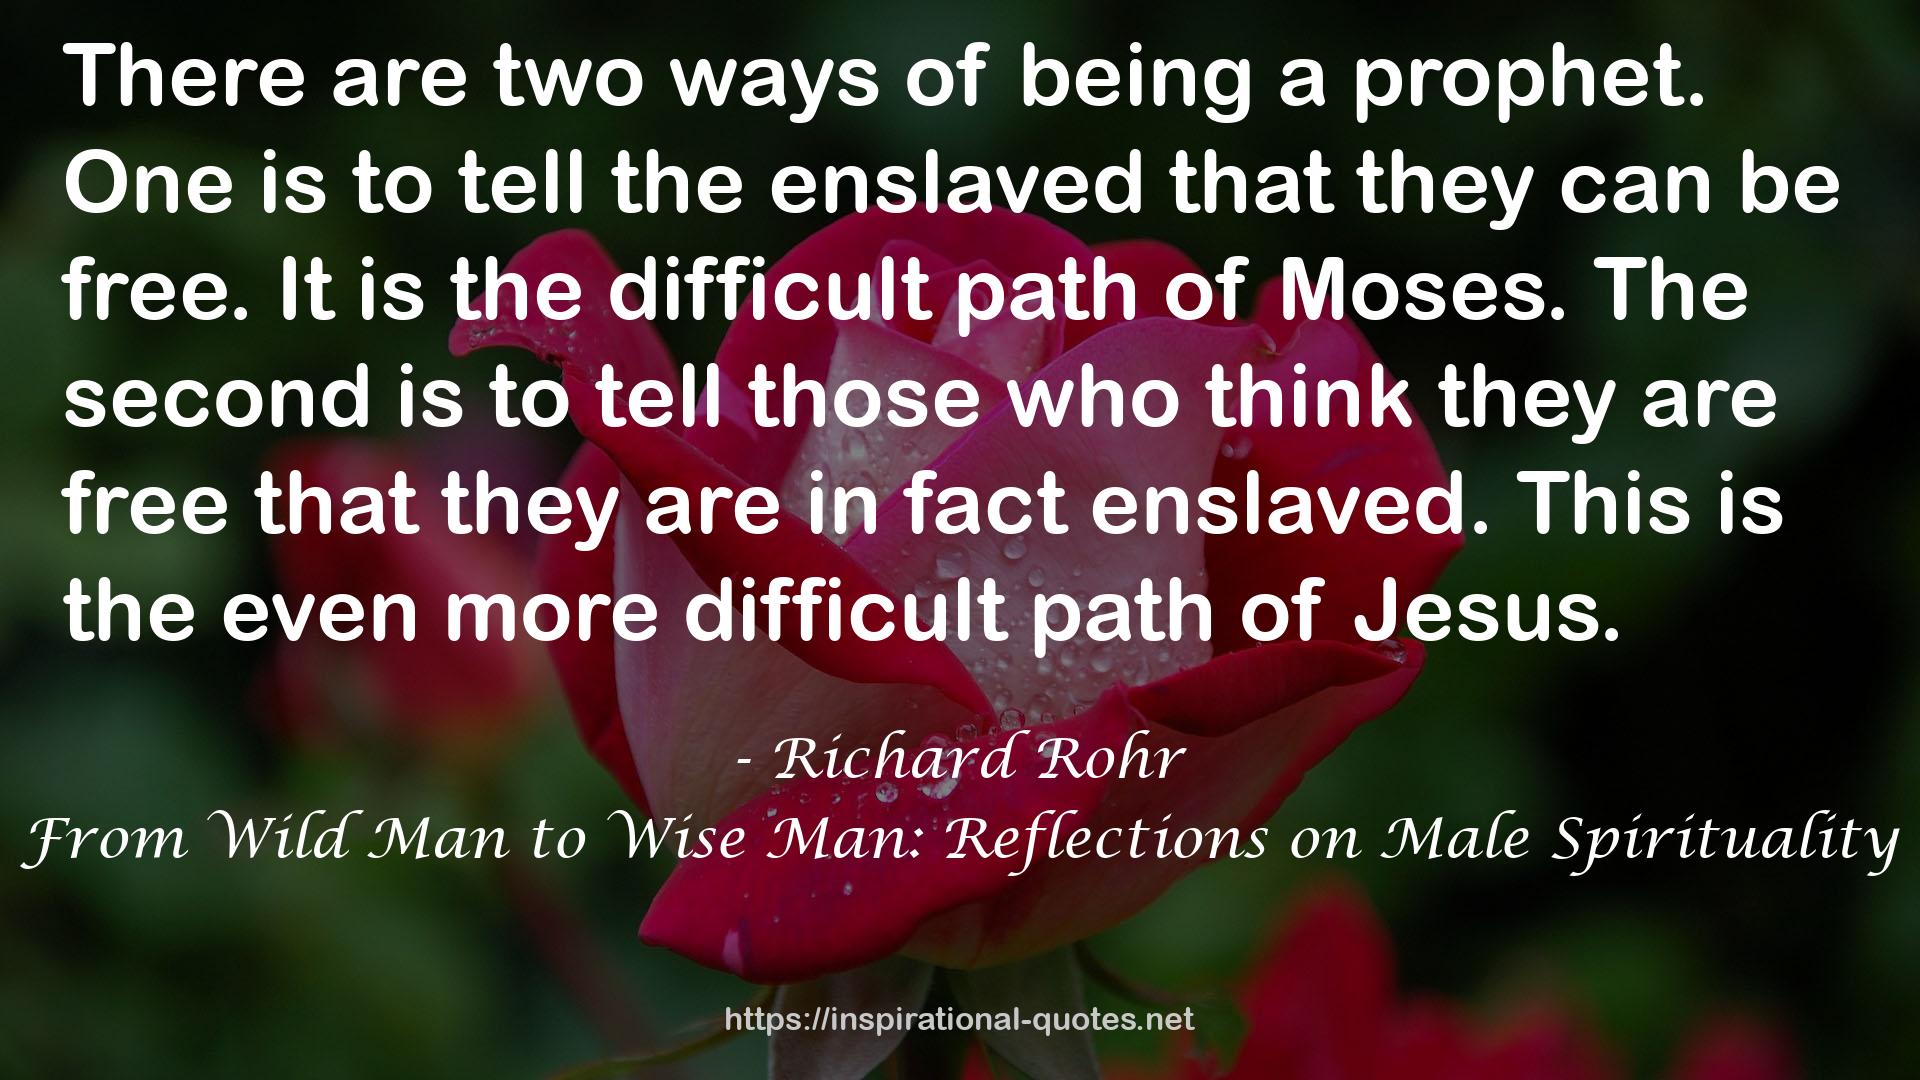 From Wild Man to Wise Man: Reflections on Male Spirituality QUOTES